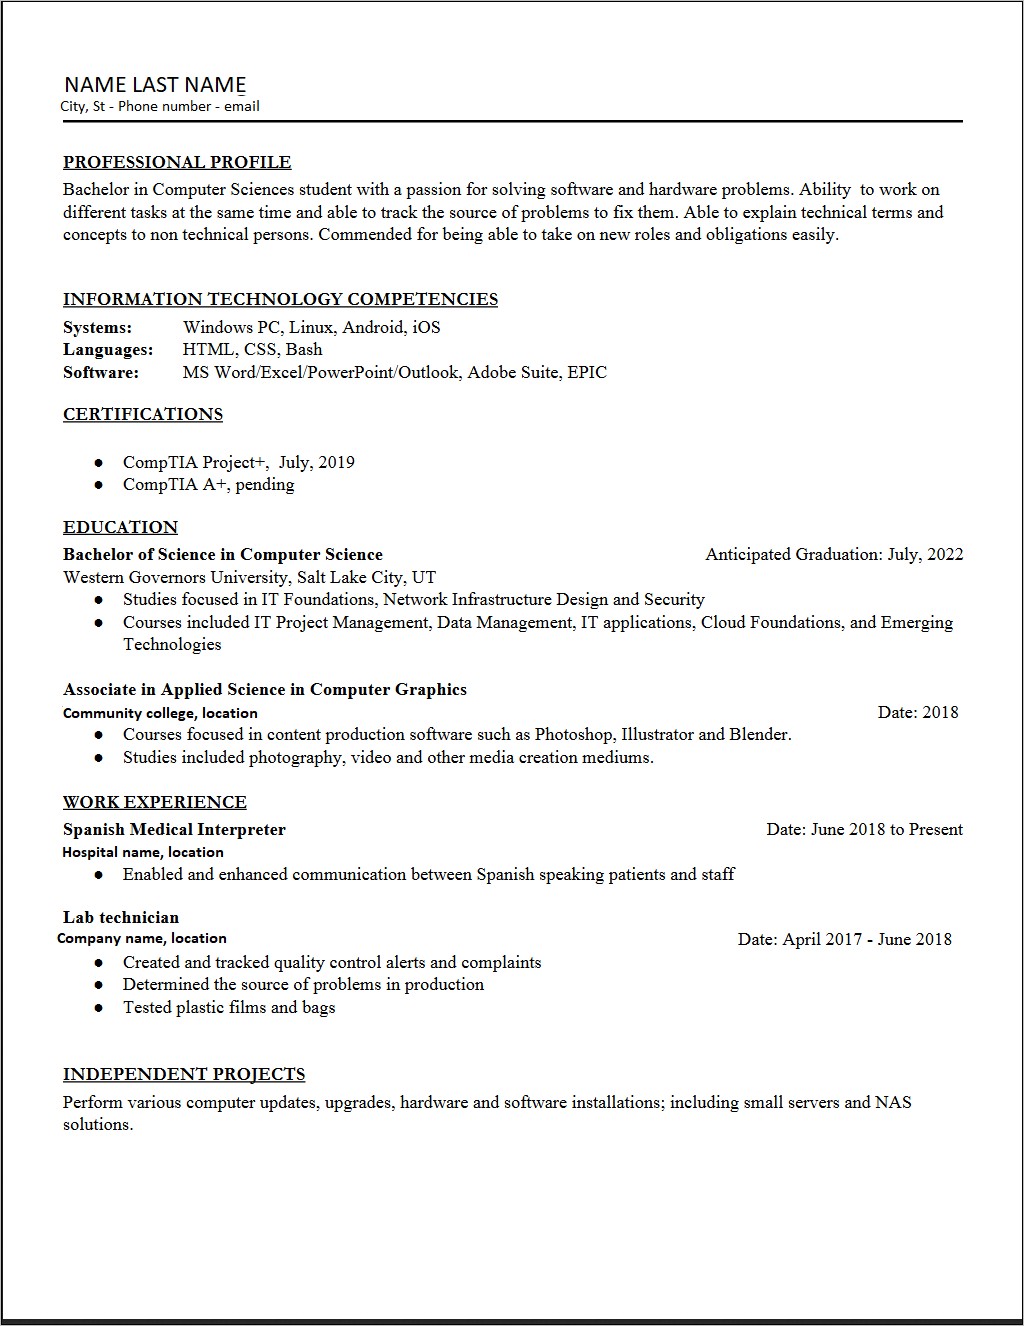 Current Job Date On Resume